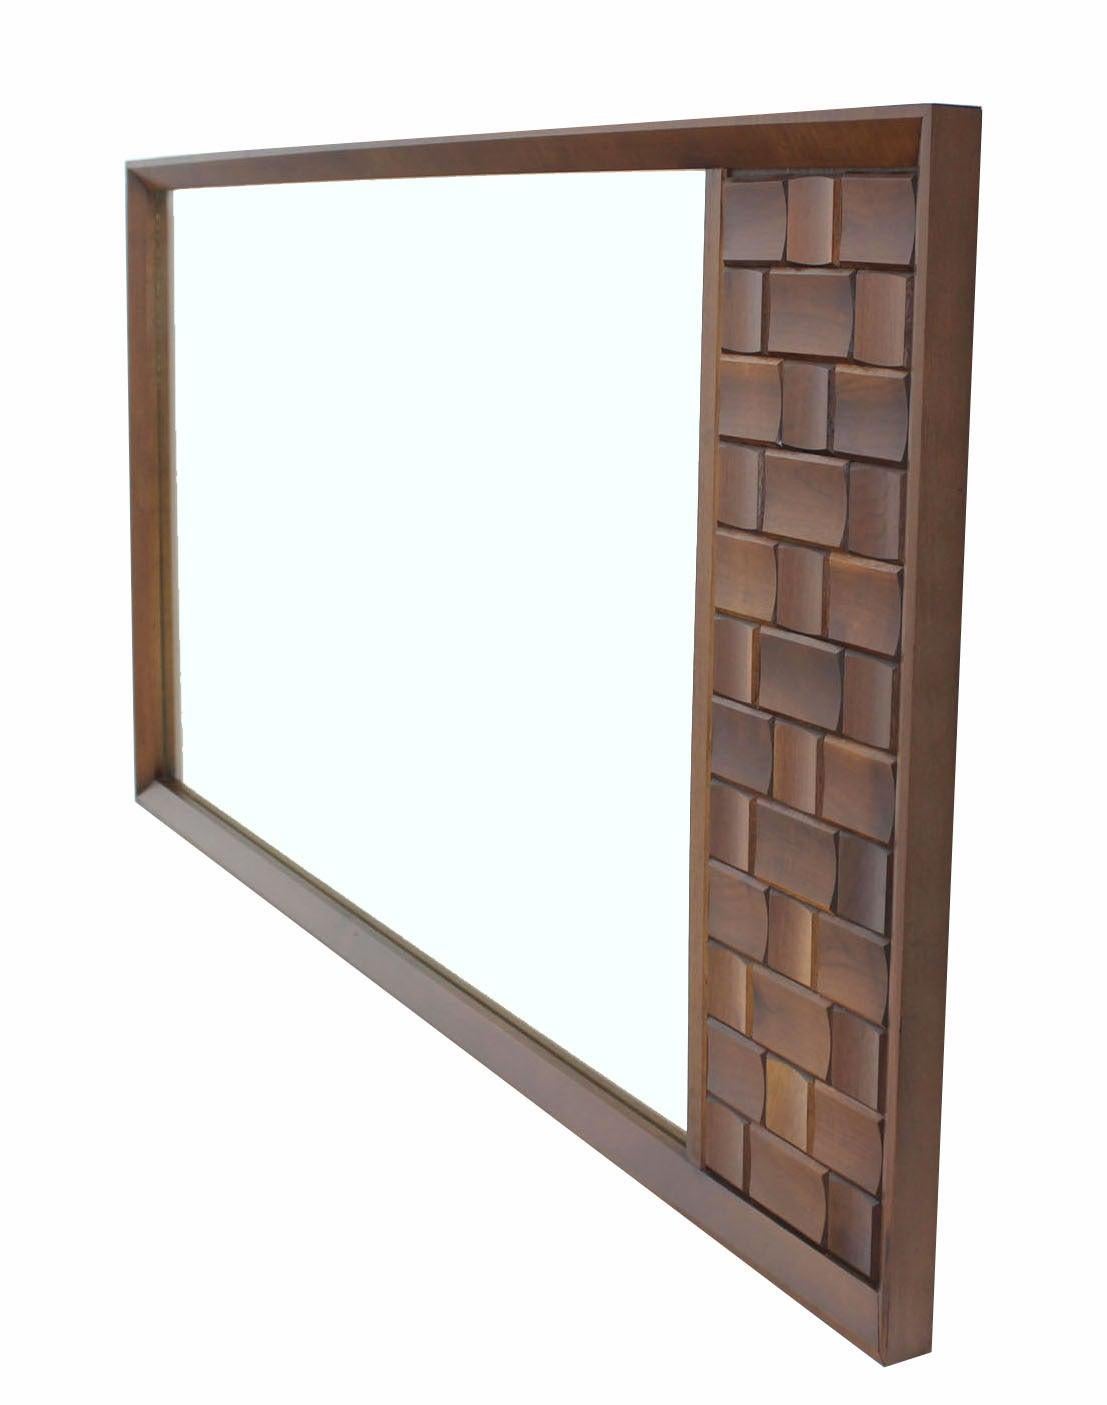 American Large MId Century Carved Walnut Frame Mirror with Solid Walnut Carved Panel MINT For Sale